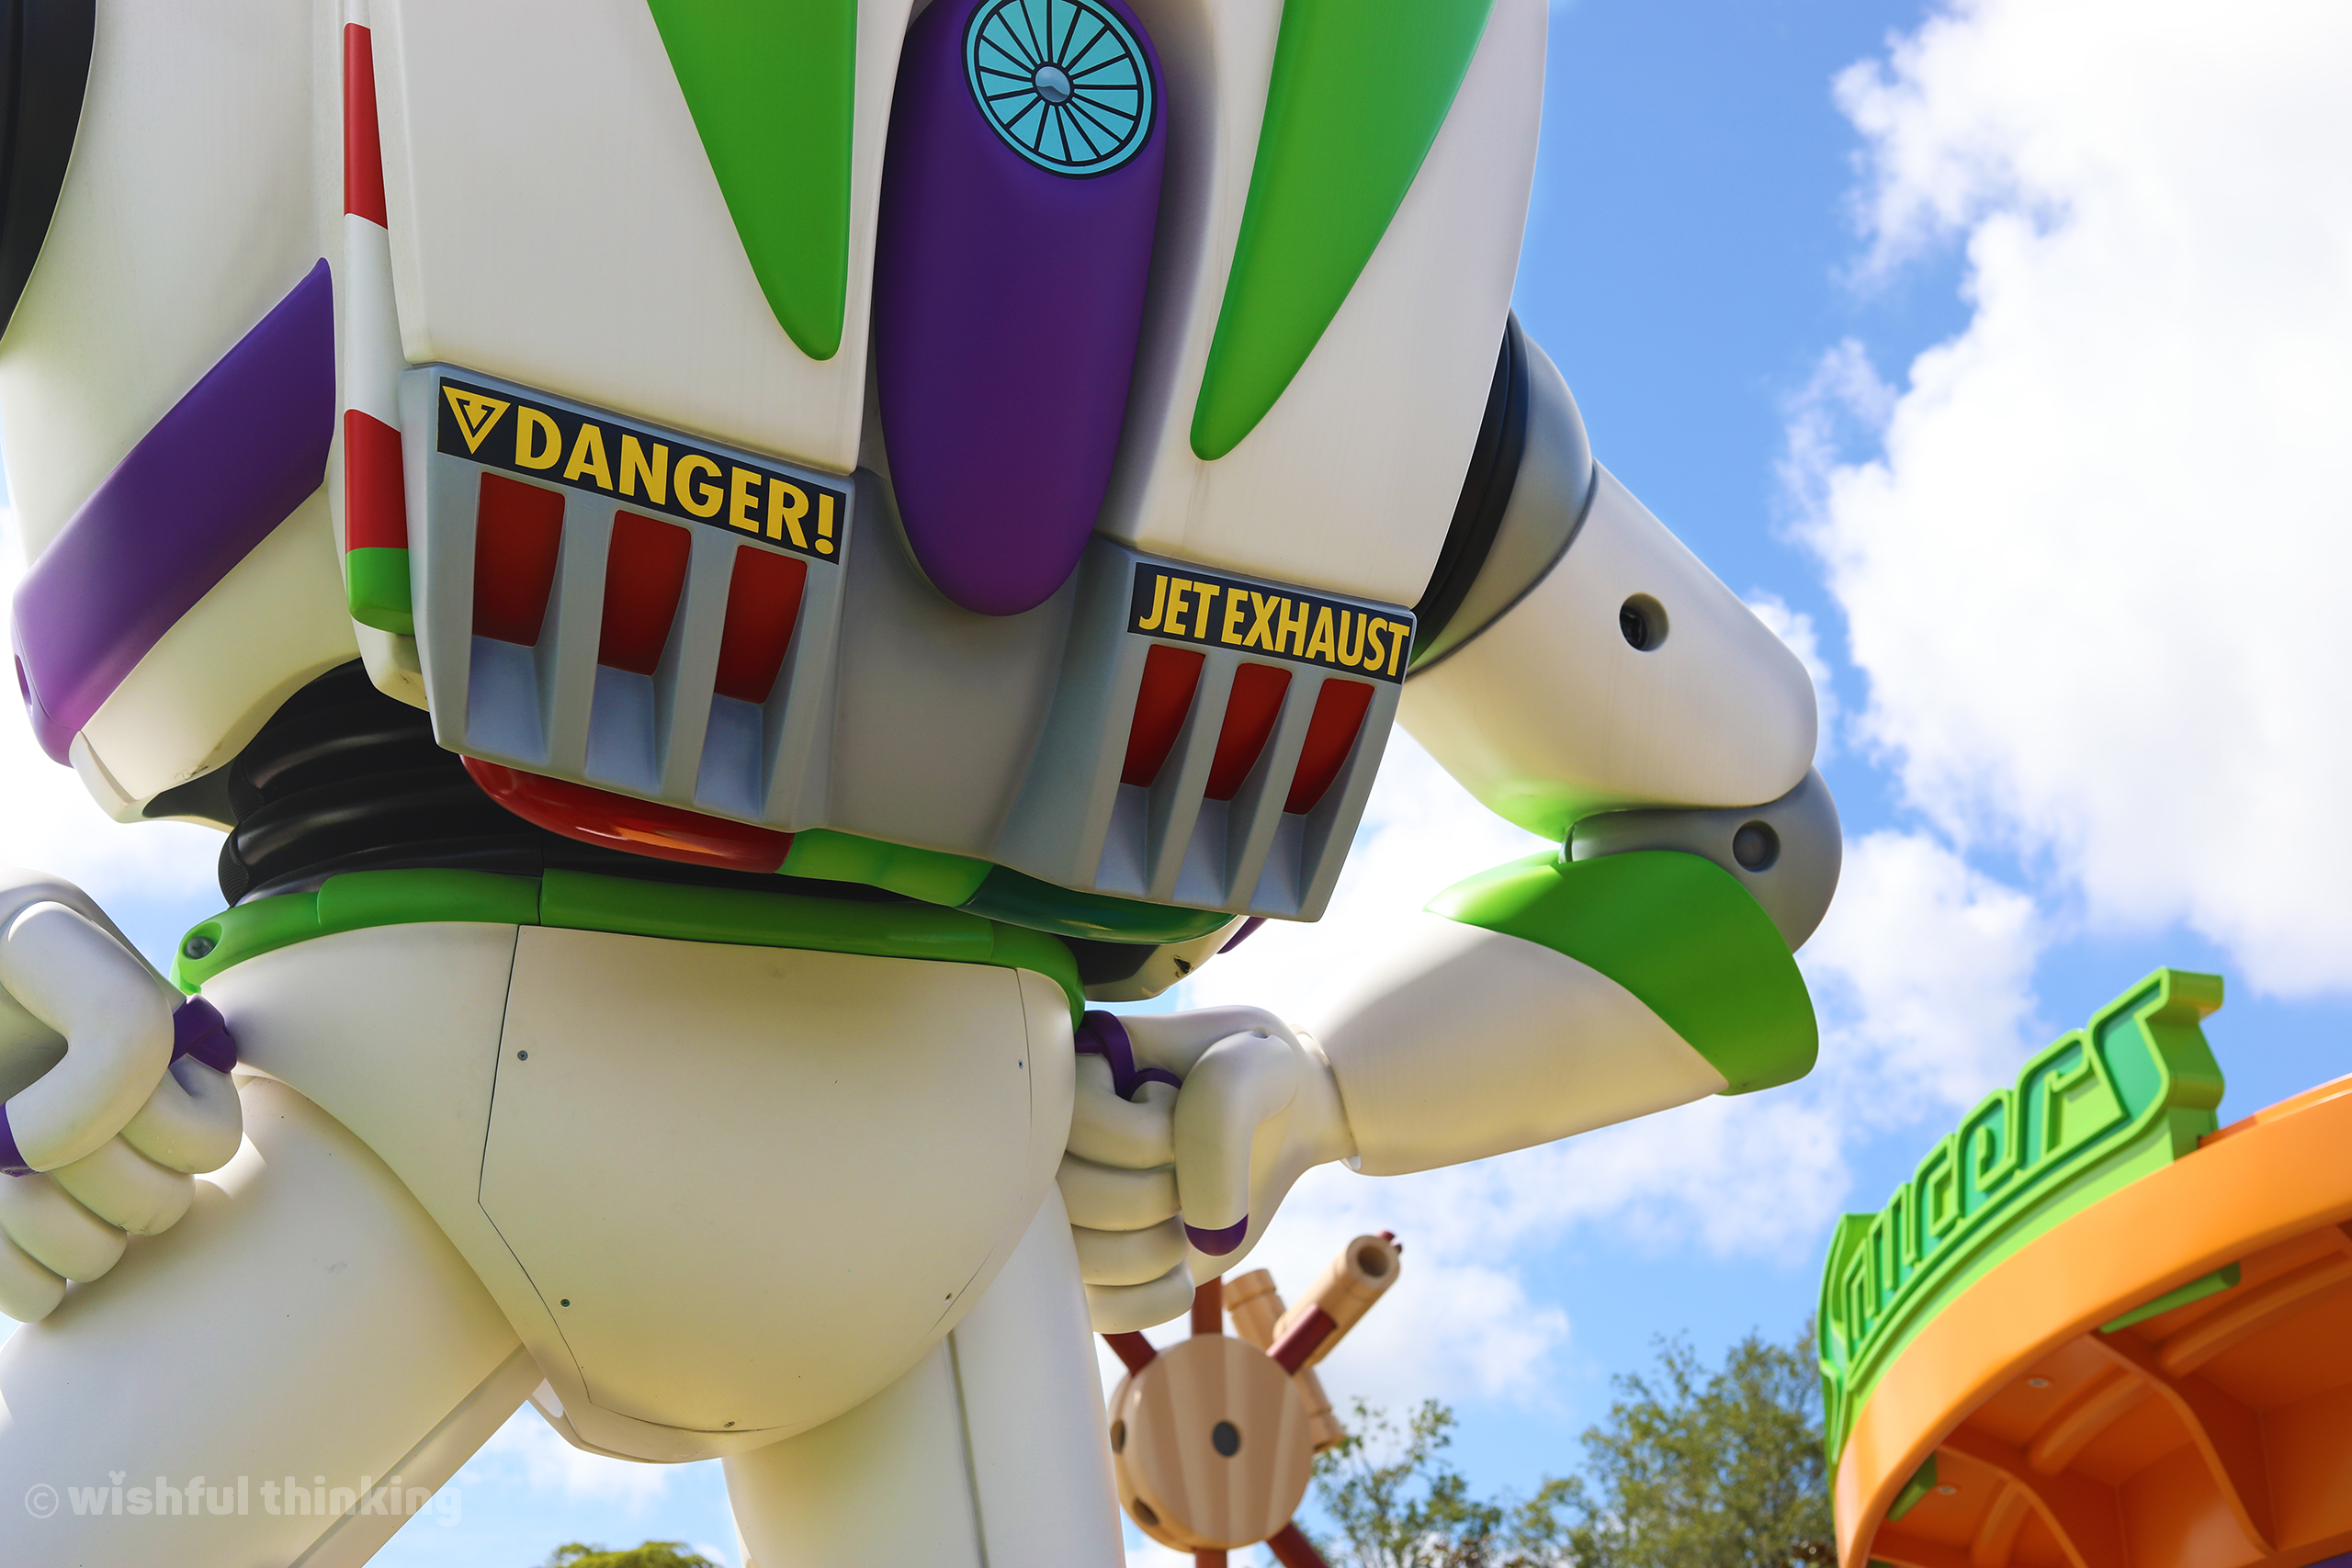 Buzz Lightyear of Star Command greets guests within Toy Story Land at Disney's Hollywood Studios in Walt Disney World